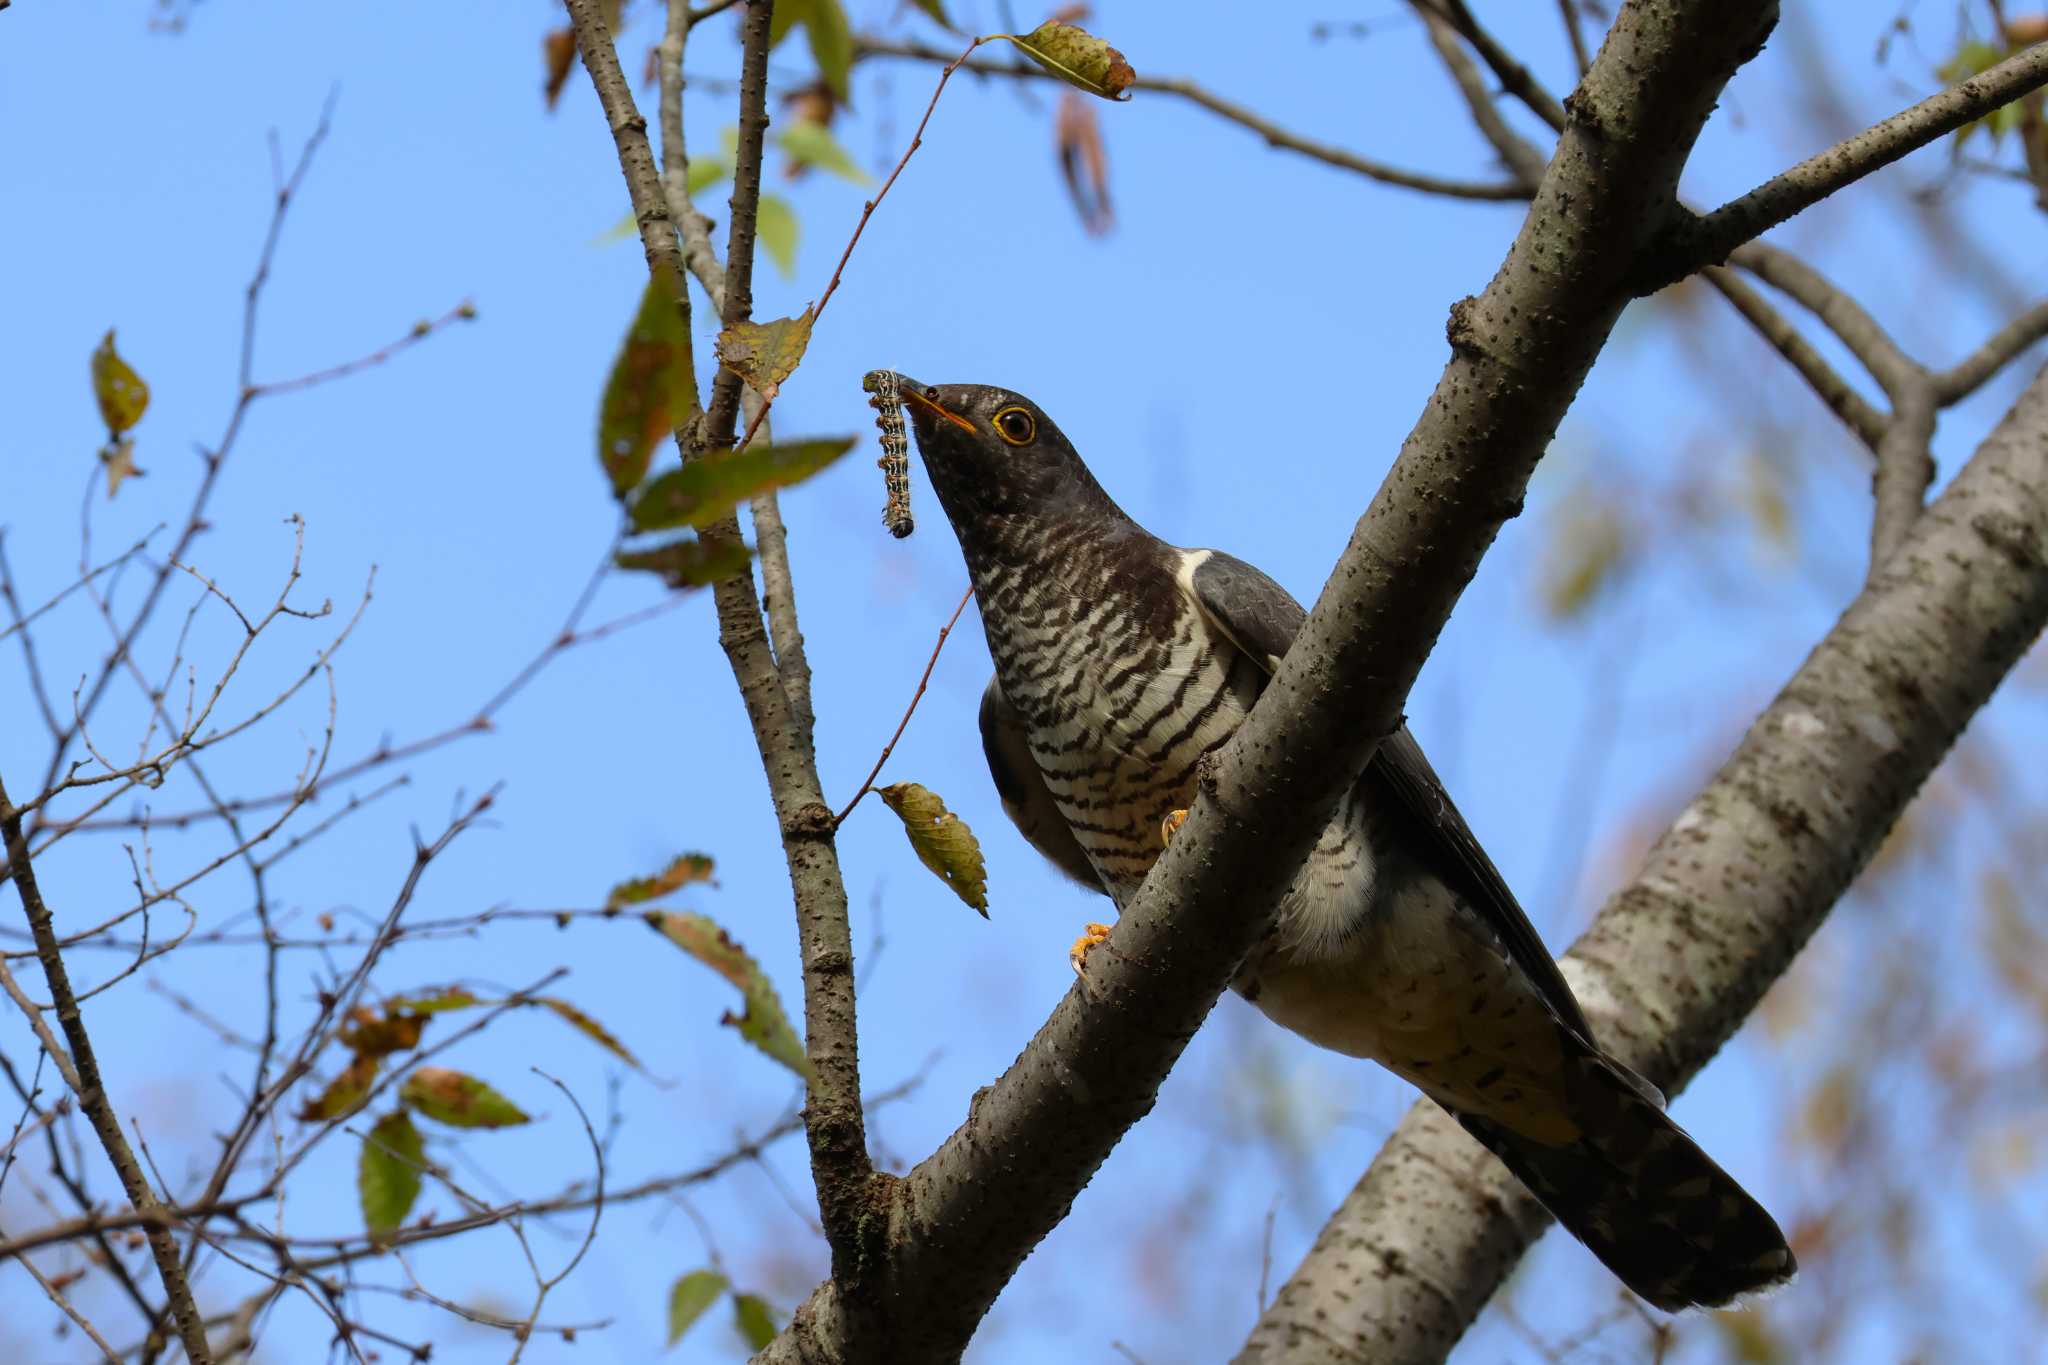 Photo of Common Cuckoo at Rokuha Park by bmont520